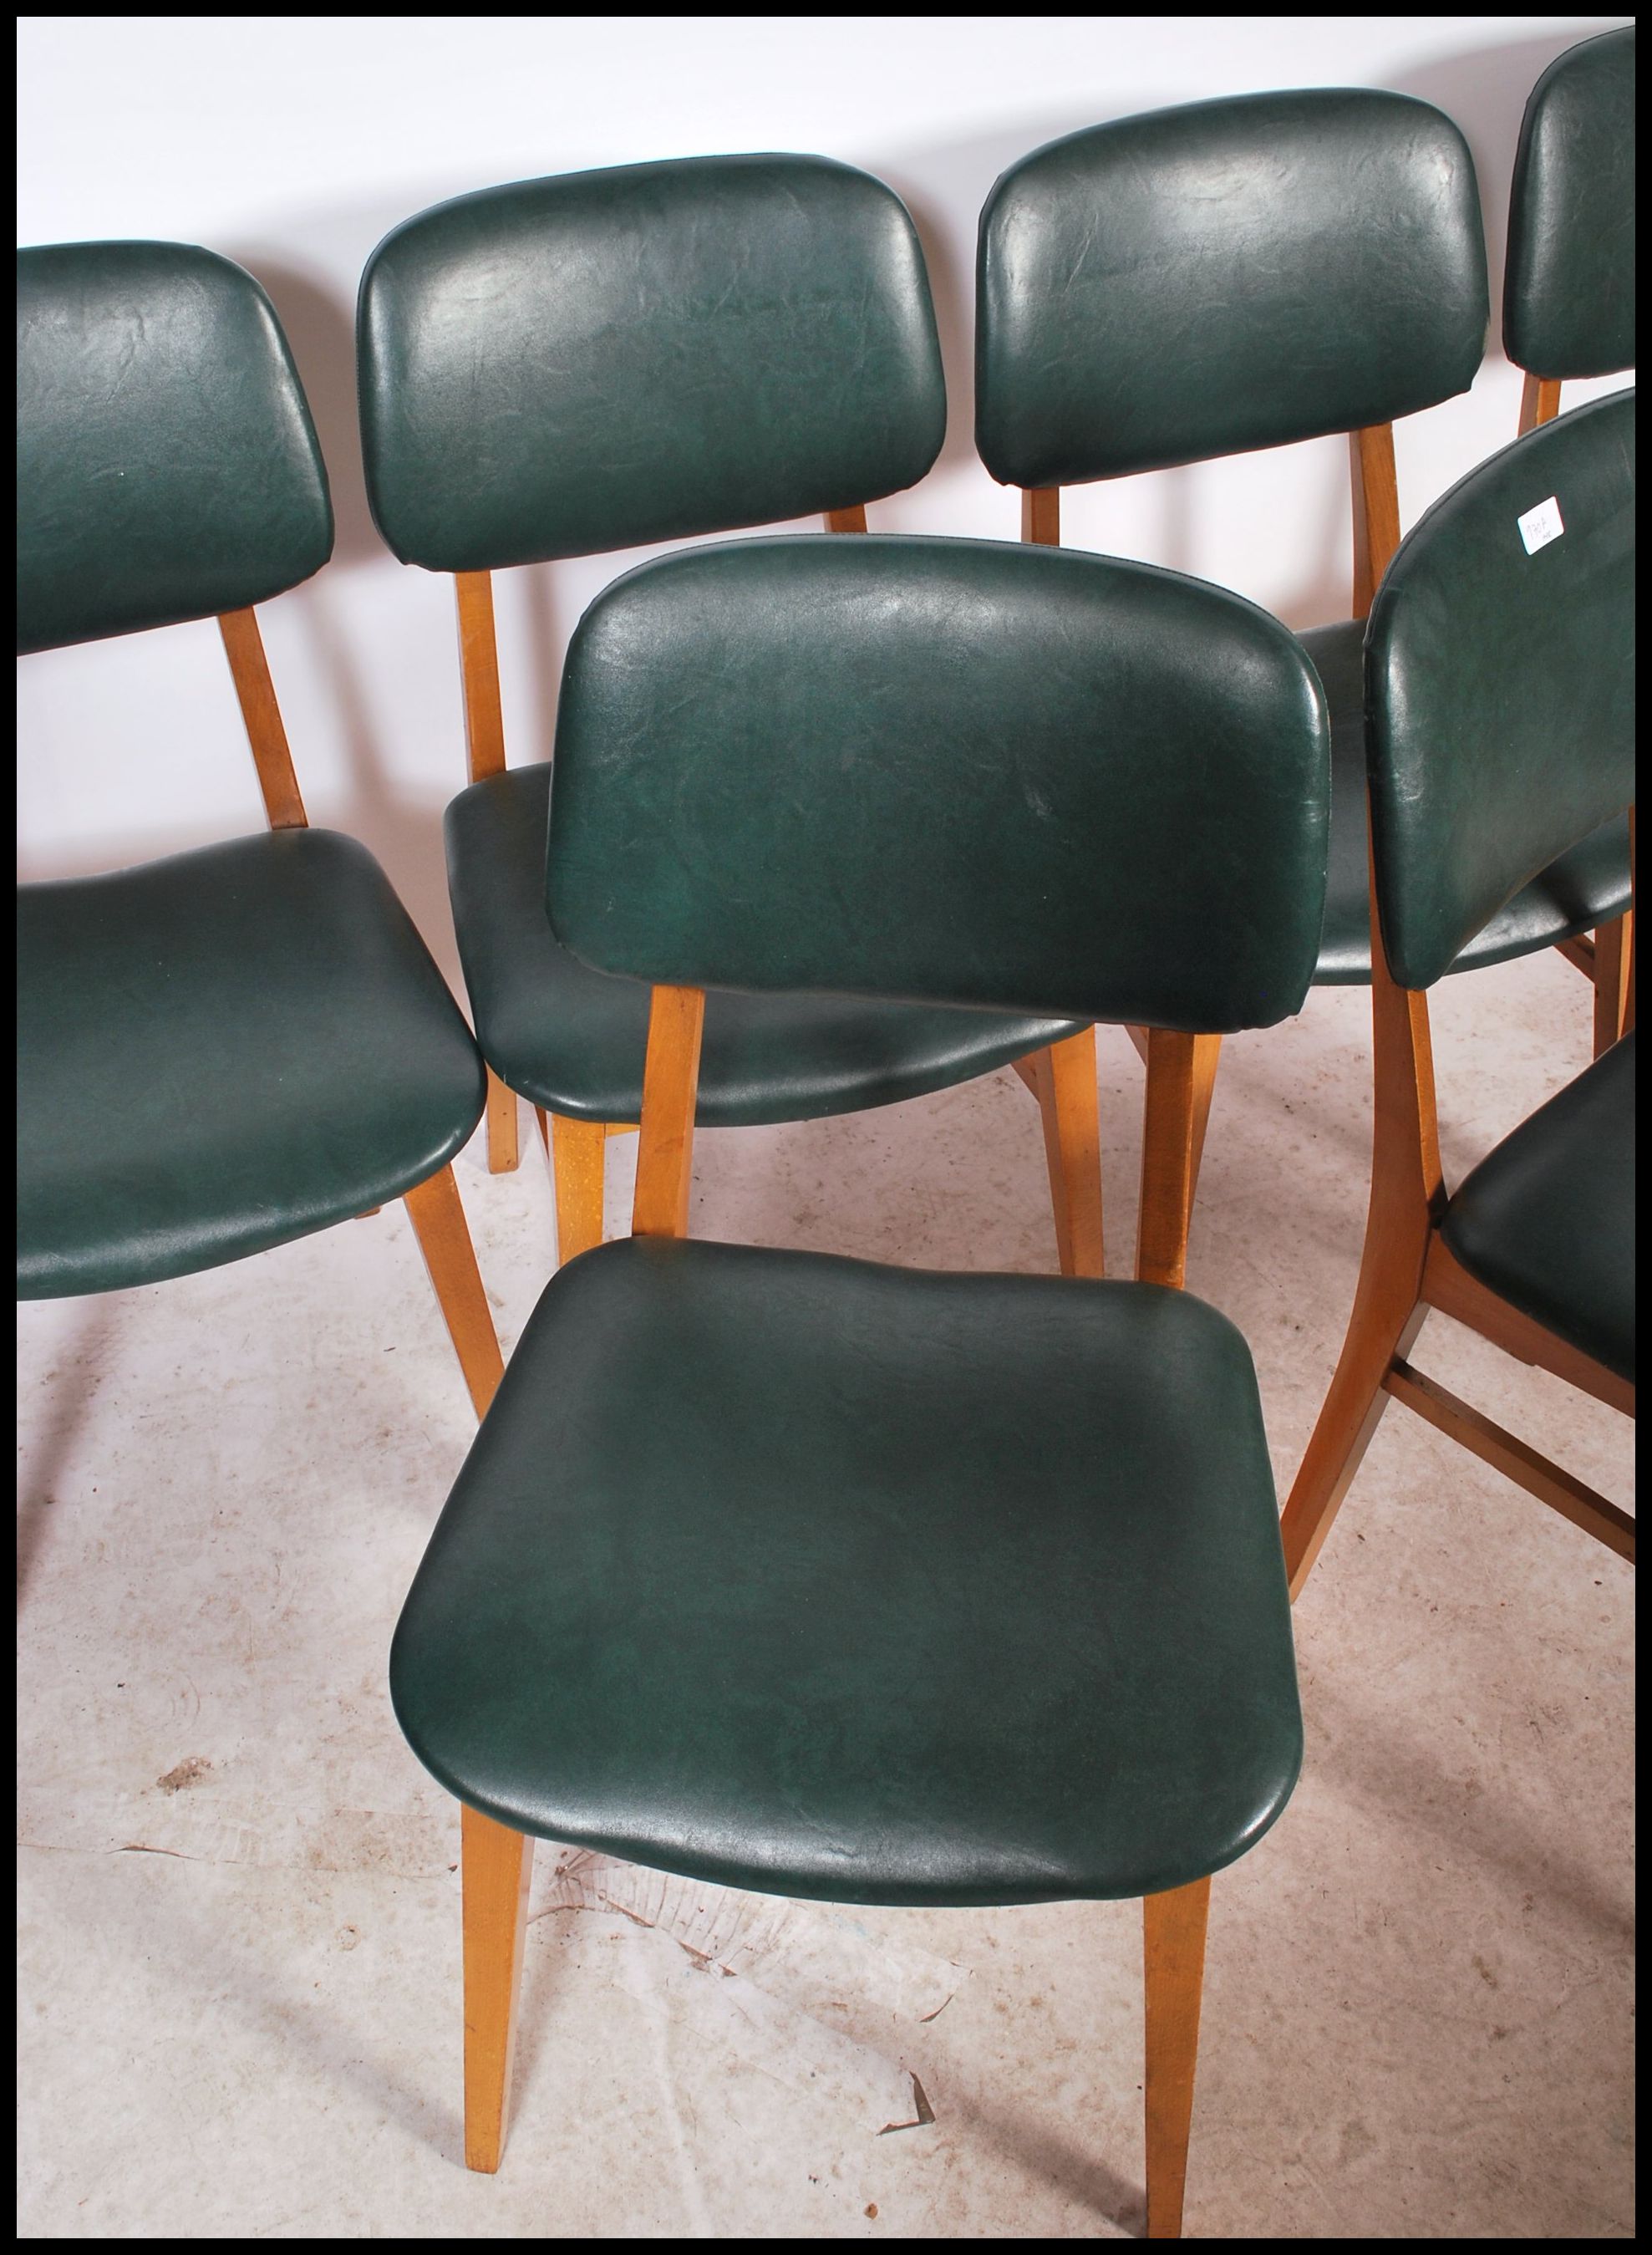 A set of 14 retro dinette utility style dining chairs / cafe chairs each with green padded seats and - Image 2 of 4